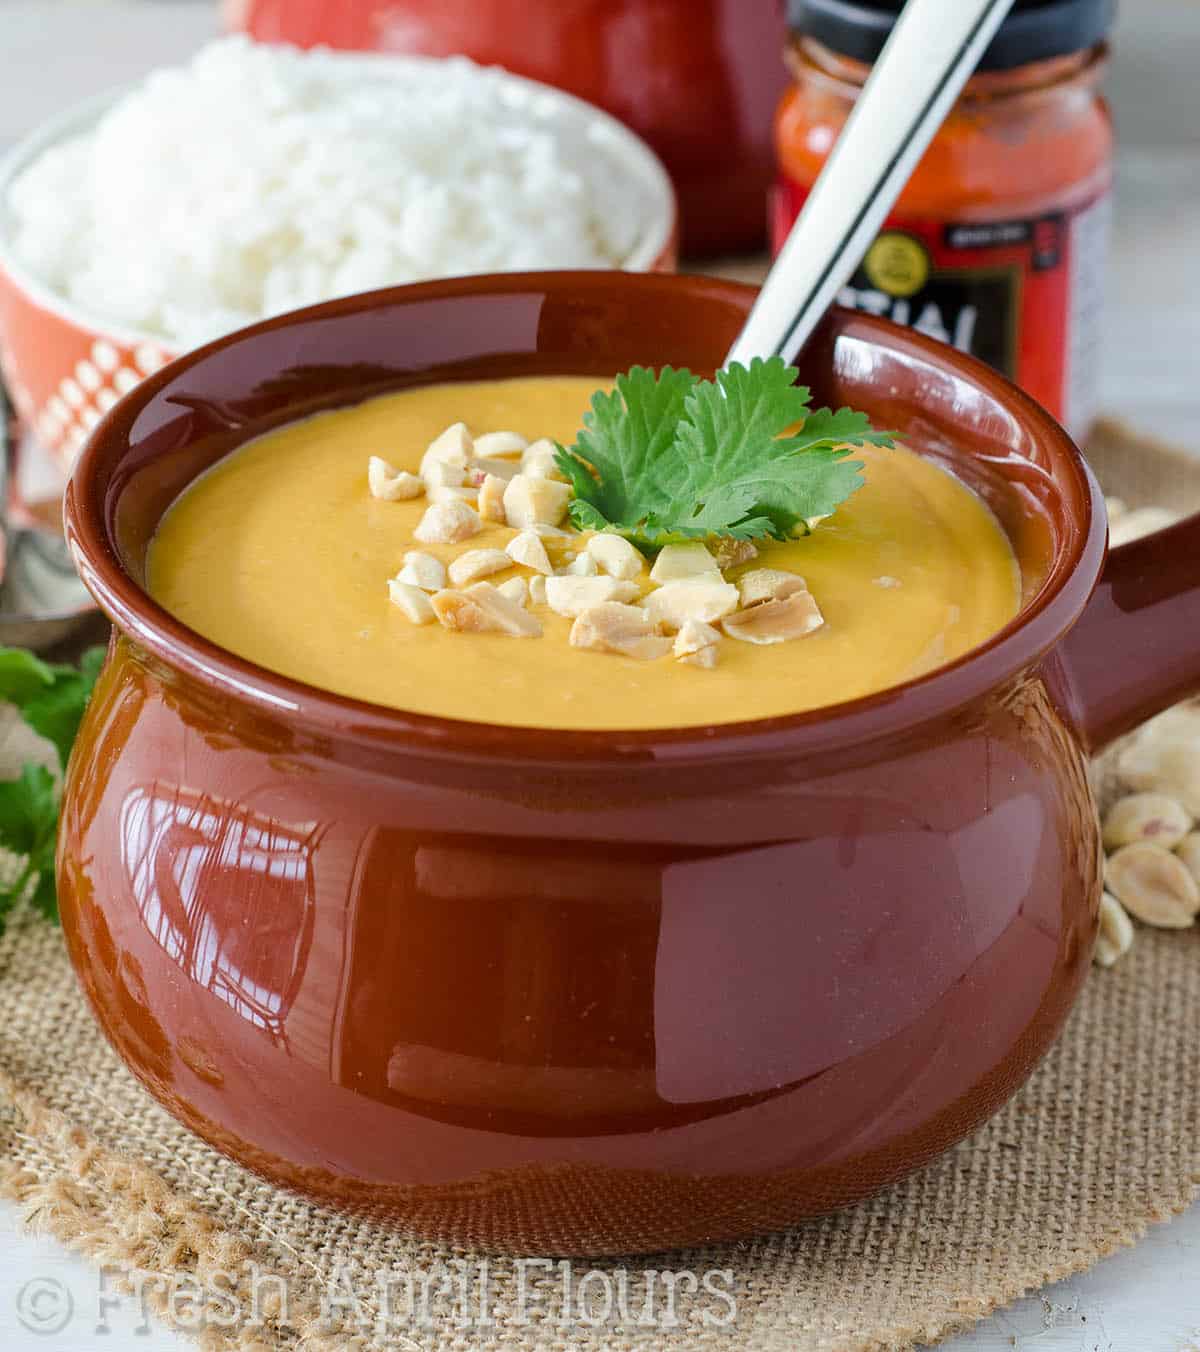 Thai Peanut Soup: Nutty and flavorful soup, filled with lots of veggies, a little bit of heat, and all of the flavors you love about Thai food. Serve over rice, add some meat, or add noodles to make this suit your meal needs and tastebuds.